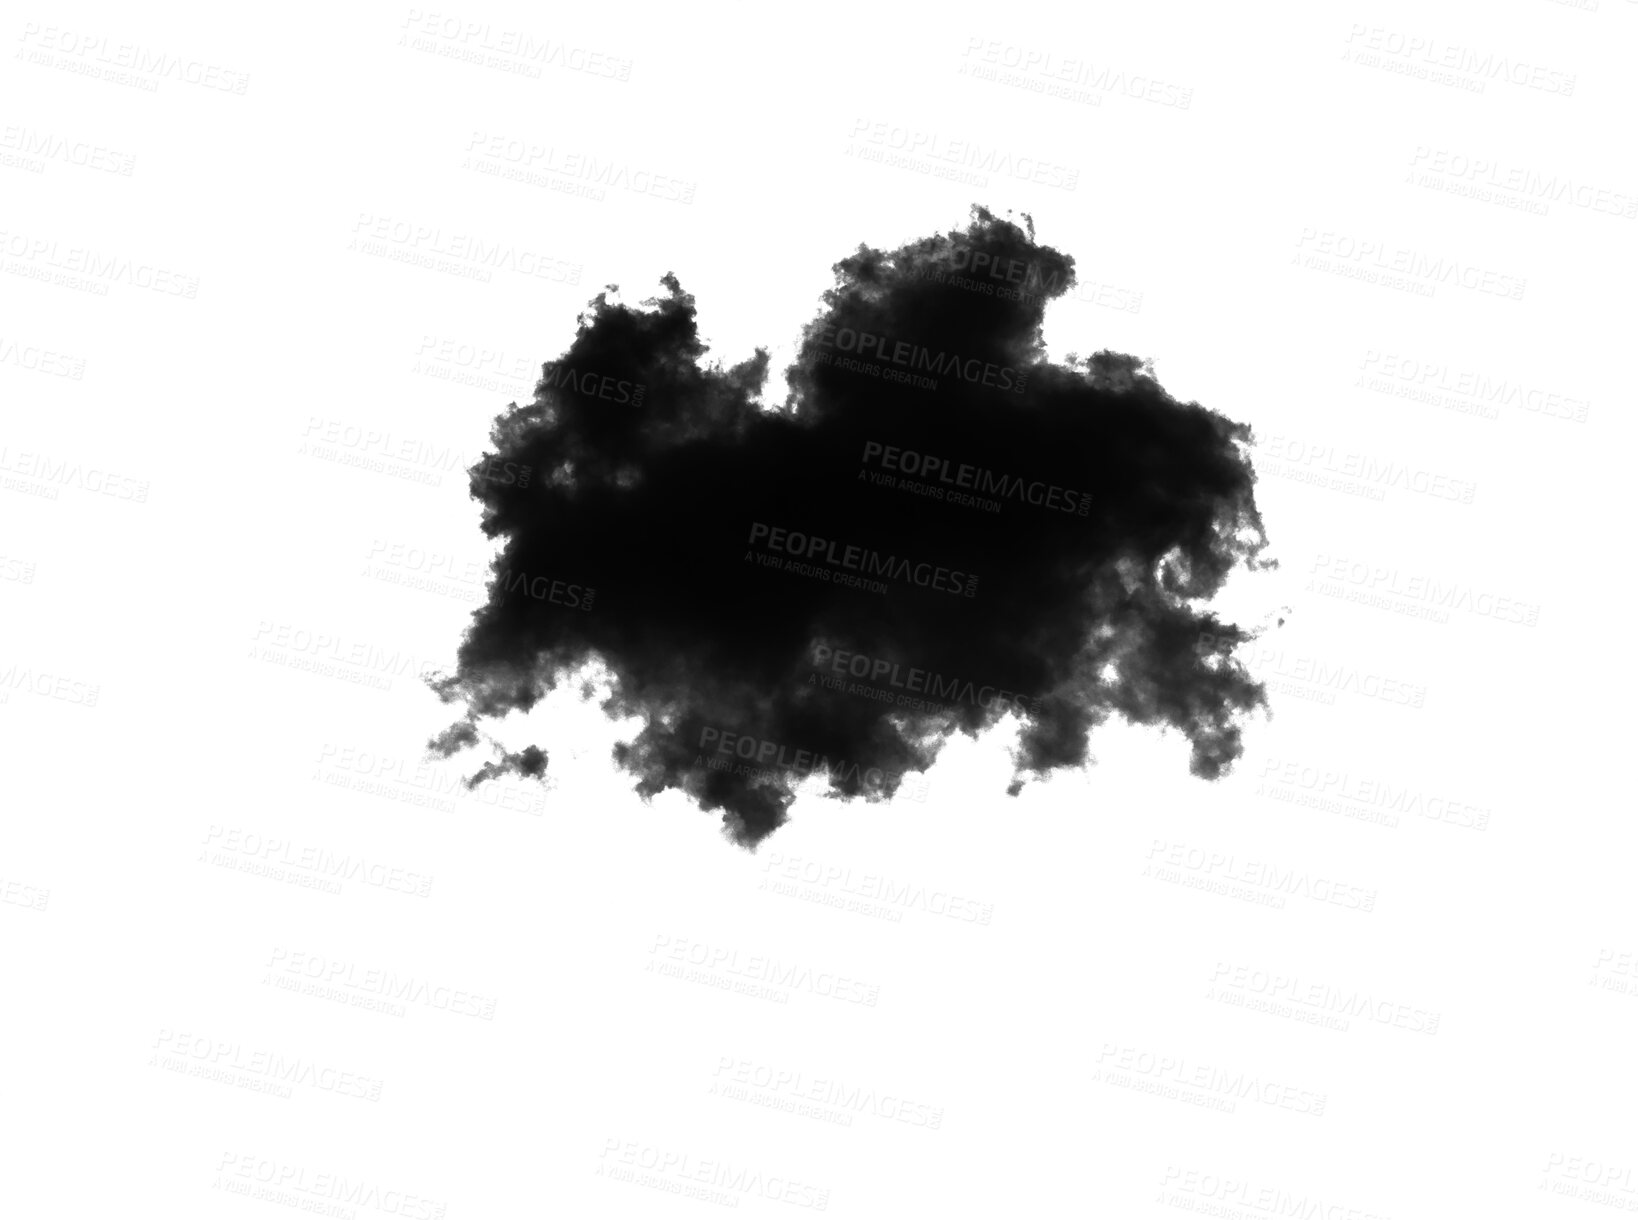 Buy stock photo Black smoke, cloud and smokey fog on isolated transparent background of steam, gas and mist explosion with powder spray. Design element, clouds and texture of a png particle, creative or steam vapor